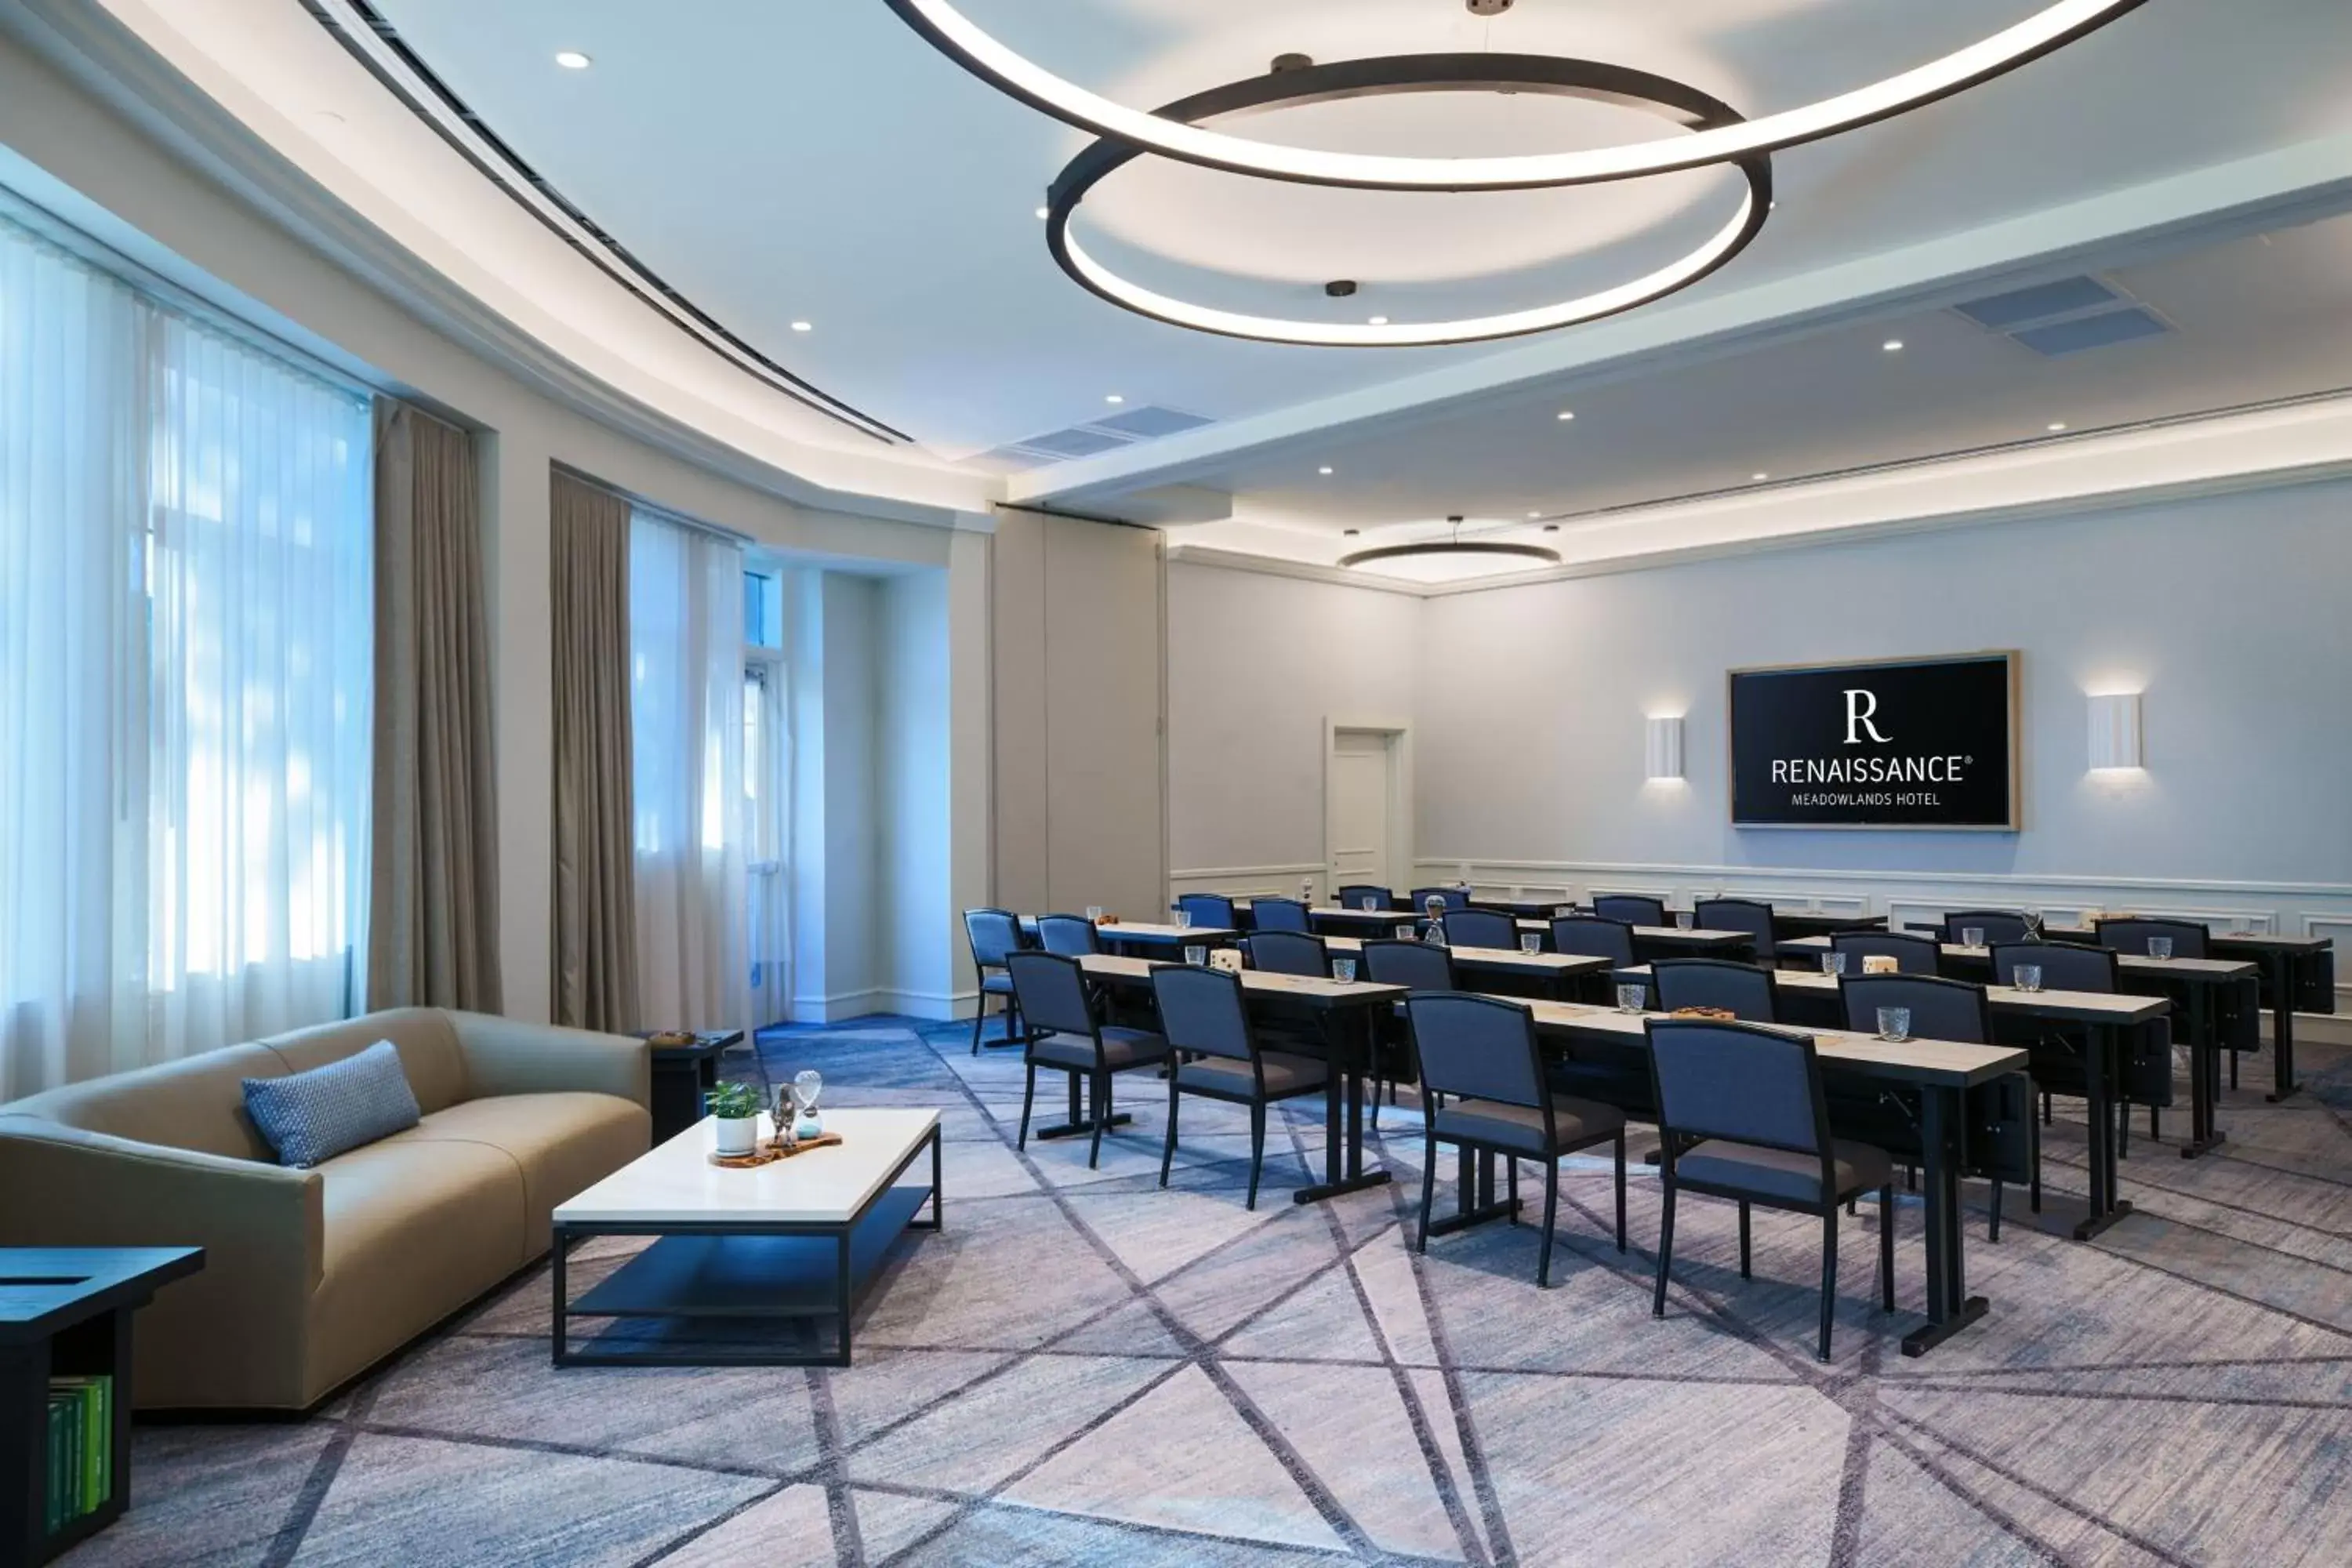 Meeting/conference room in Renaissance Meadowlands Hotel